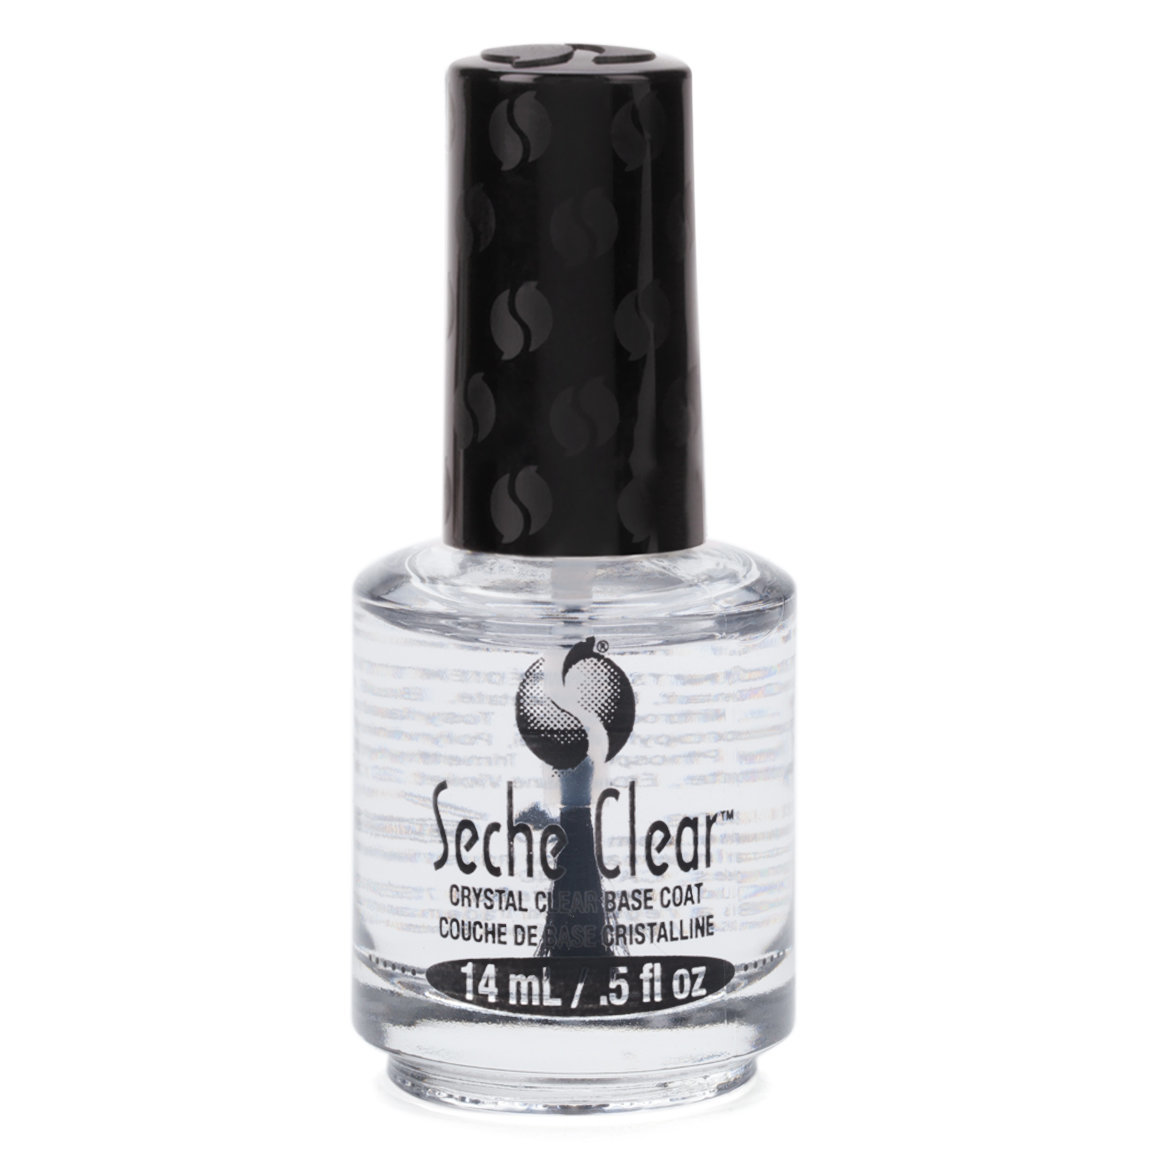 Seche Clear Crystal Clear Base Coat alternative view 1 - product swatch.